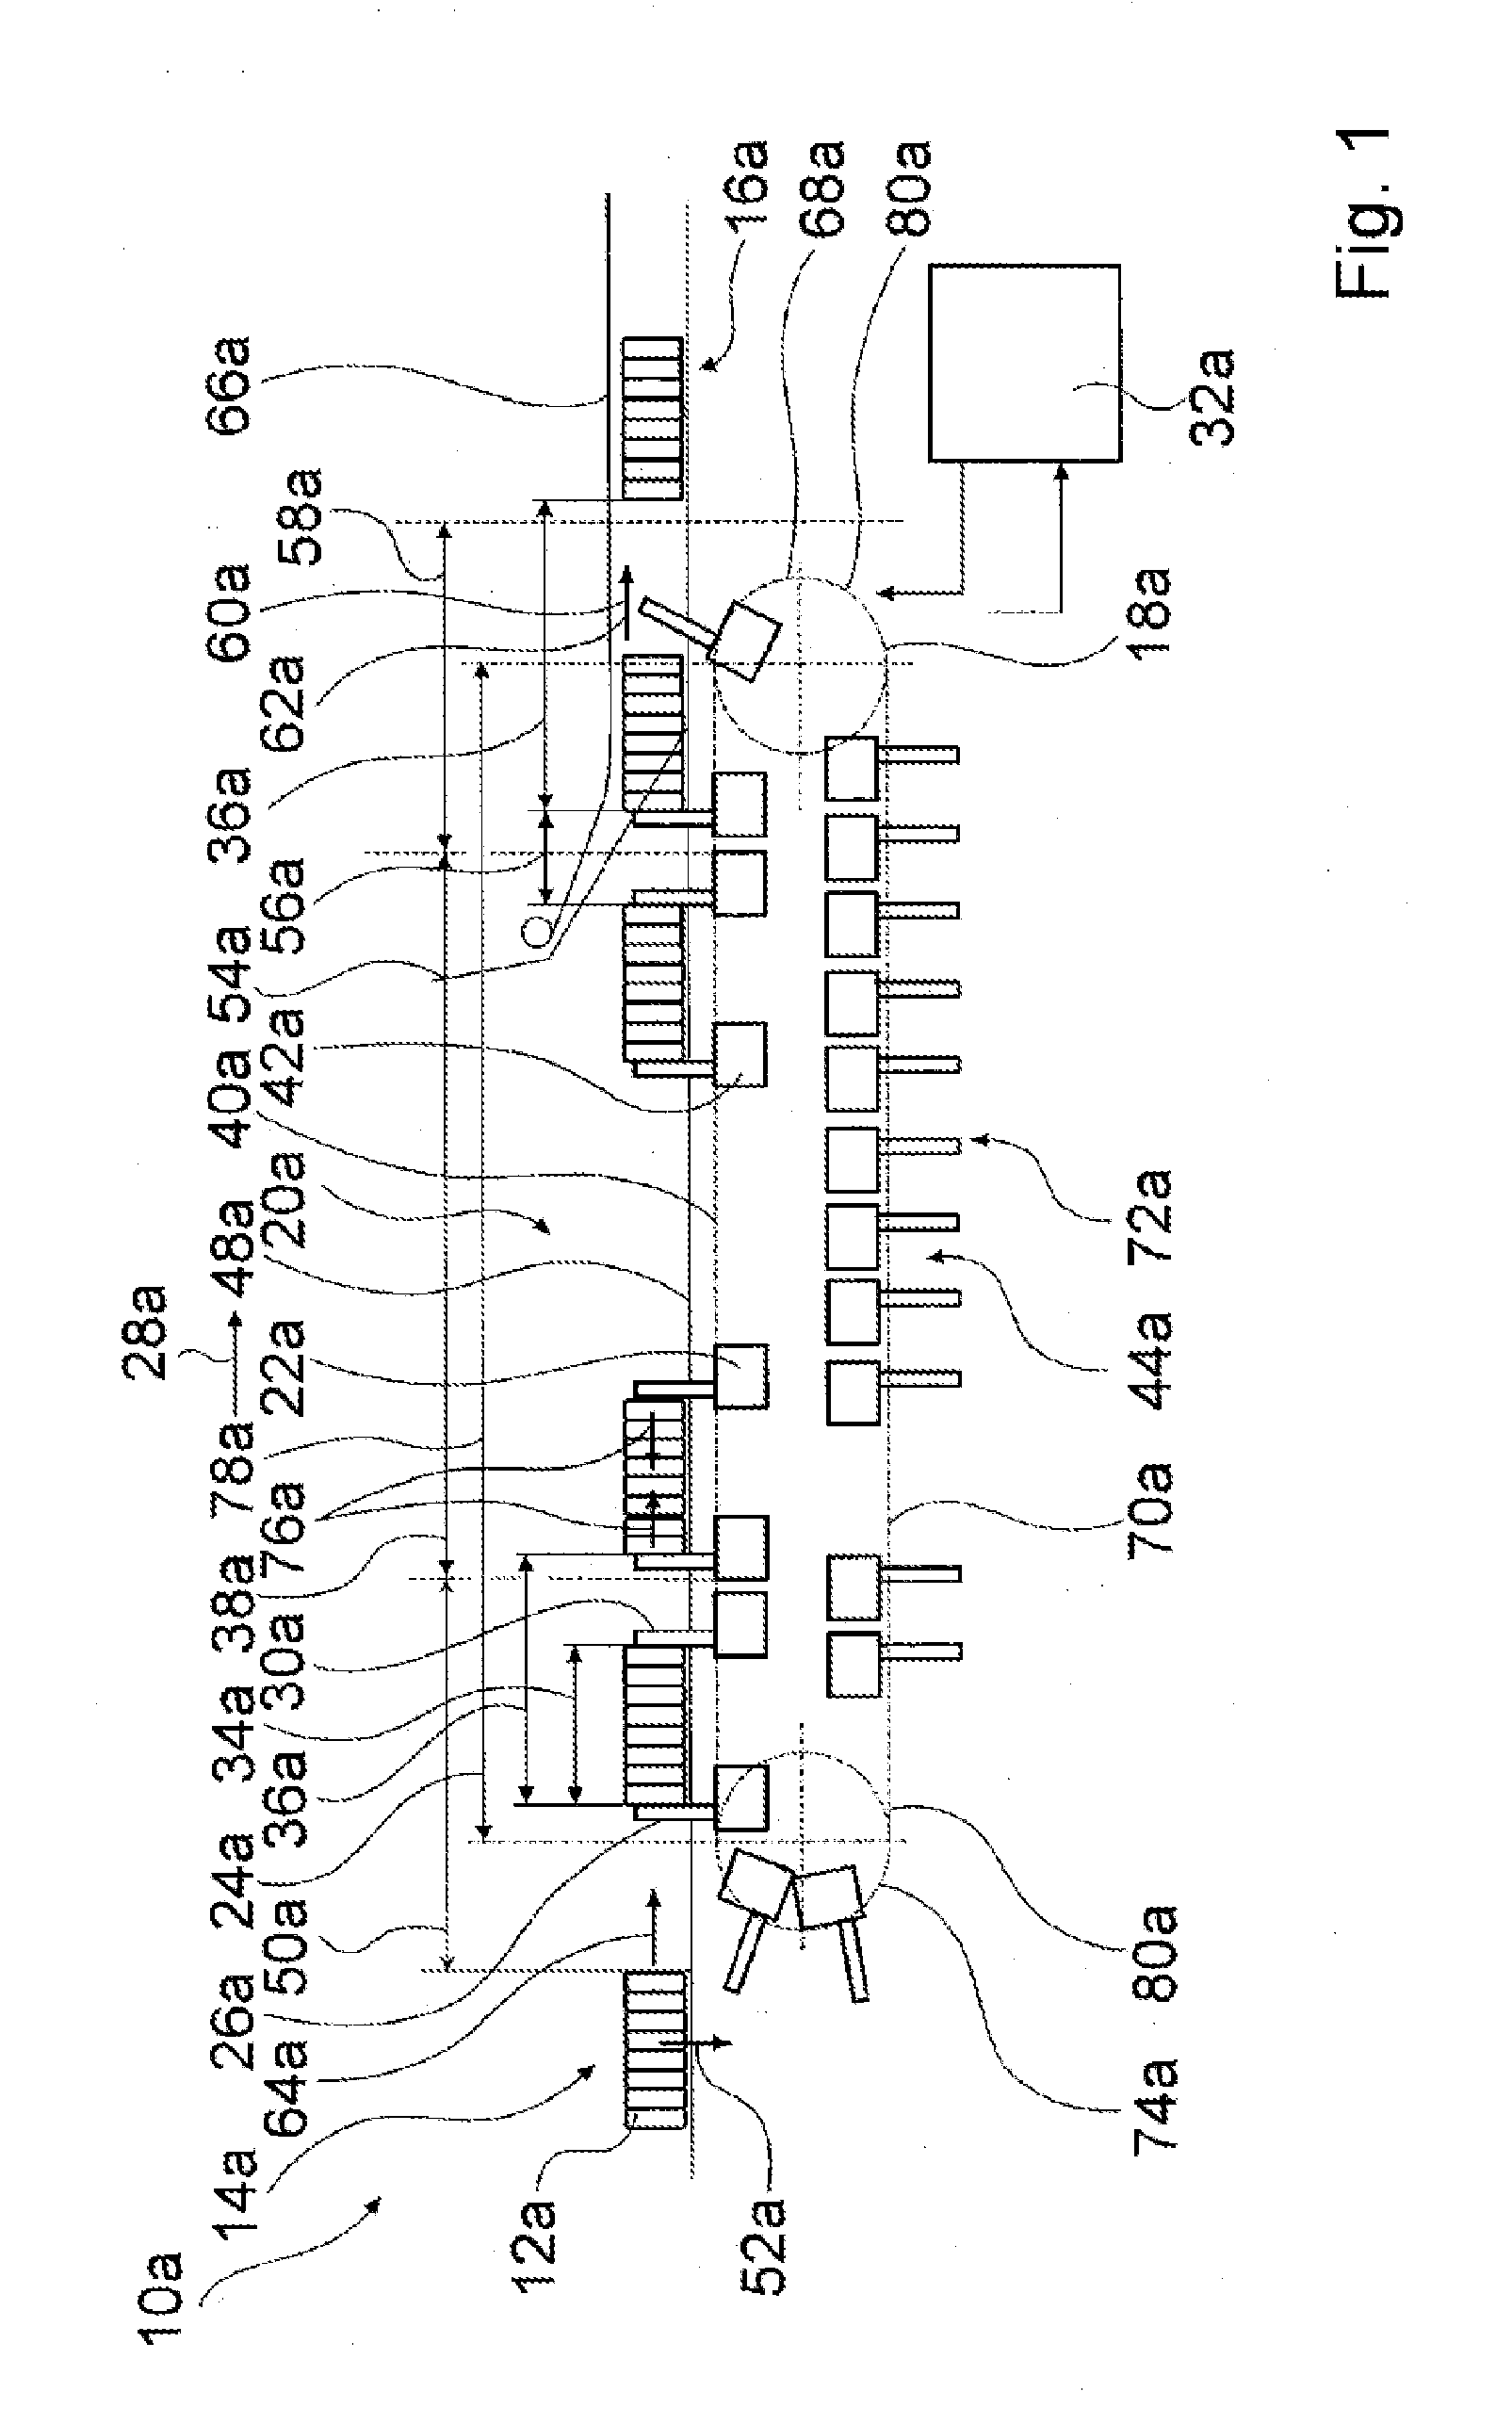 Feeding device for packaging machine